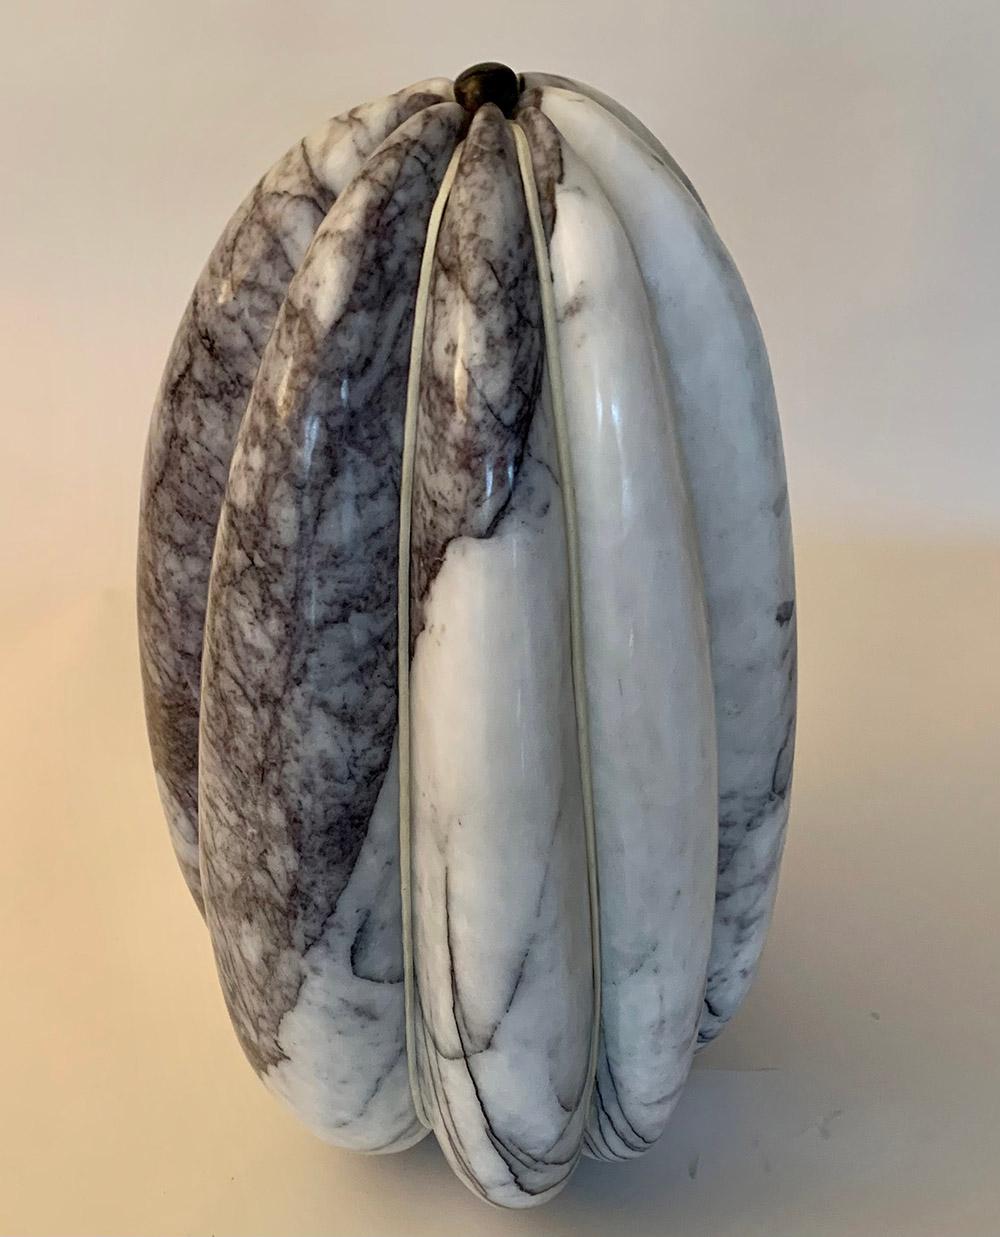 Lilac marble, rawhide, ebony wood, 54 cm × 28 cm × 31 cm.
Unique work delivered with a certificate of authenticity. 
Peter Brooke-Ball's works surprise with their humour, simplicity and sensuality. As he himself states, the desire is to create